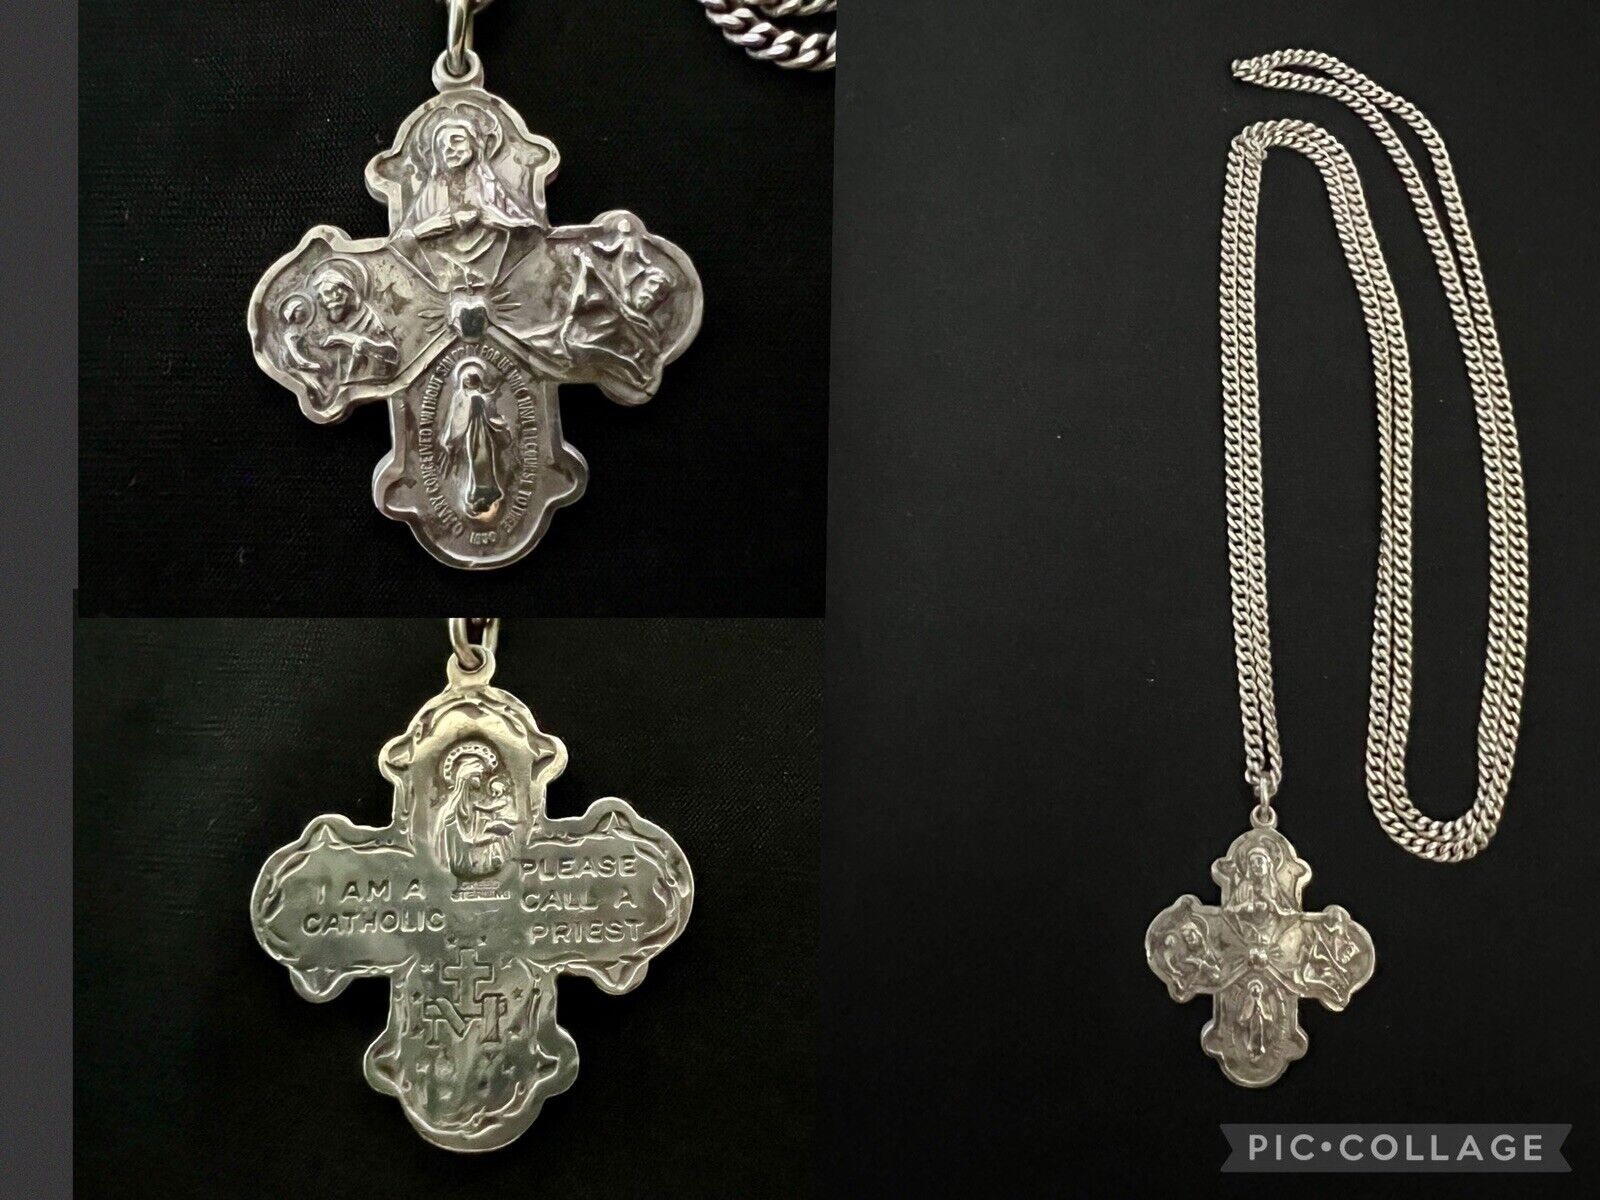 Vintage Creed Sterling Silver 4 Way Cross Pendant w/ 24” Sterling Necklace 13 g